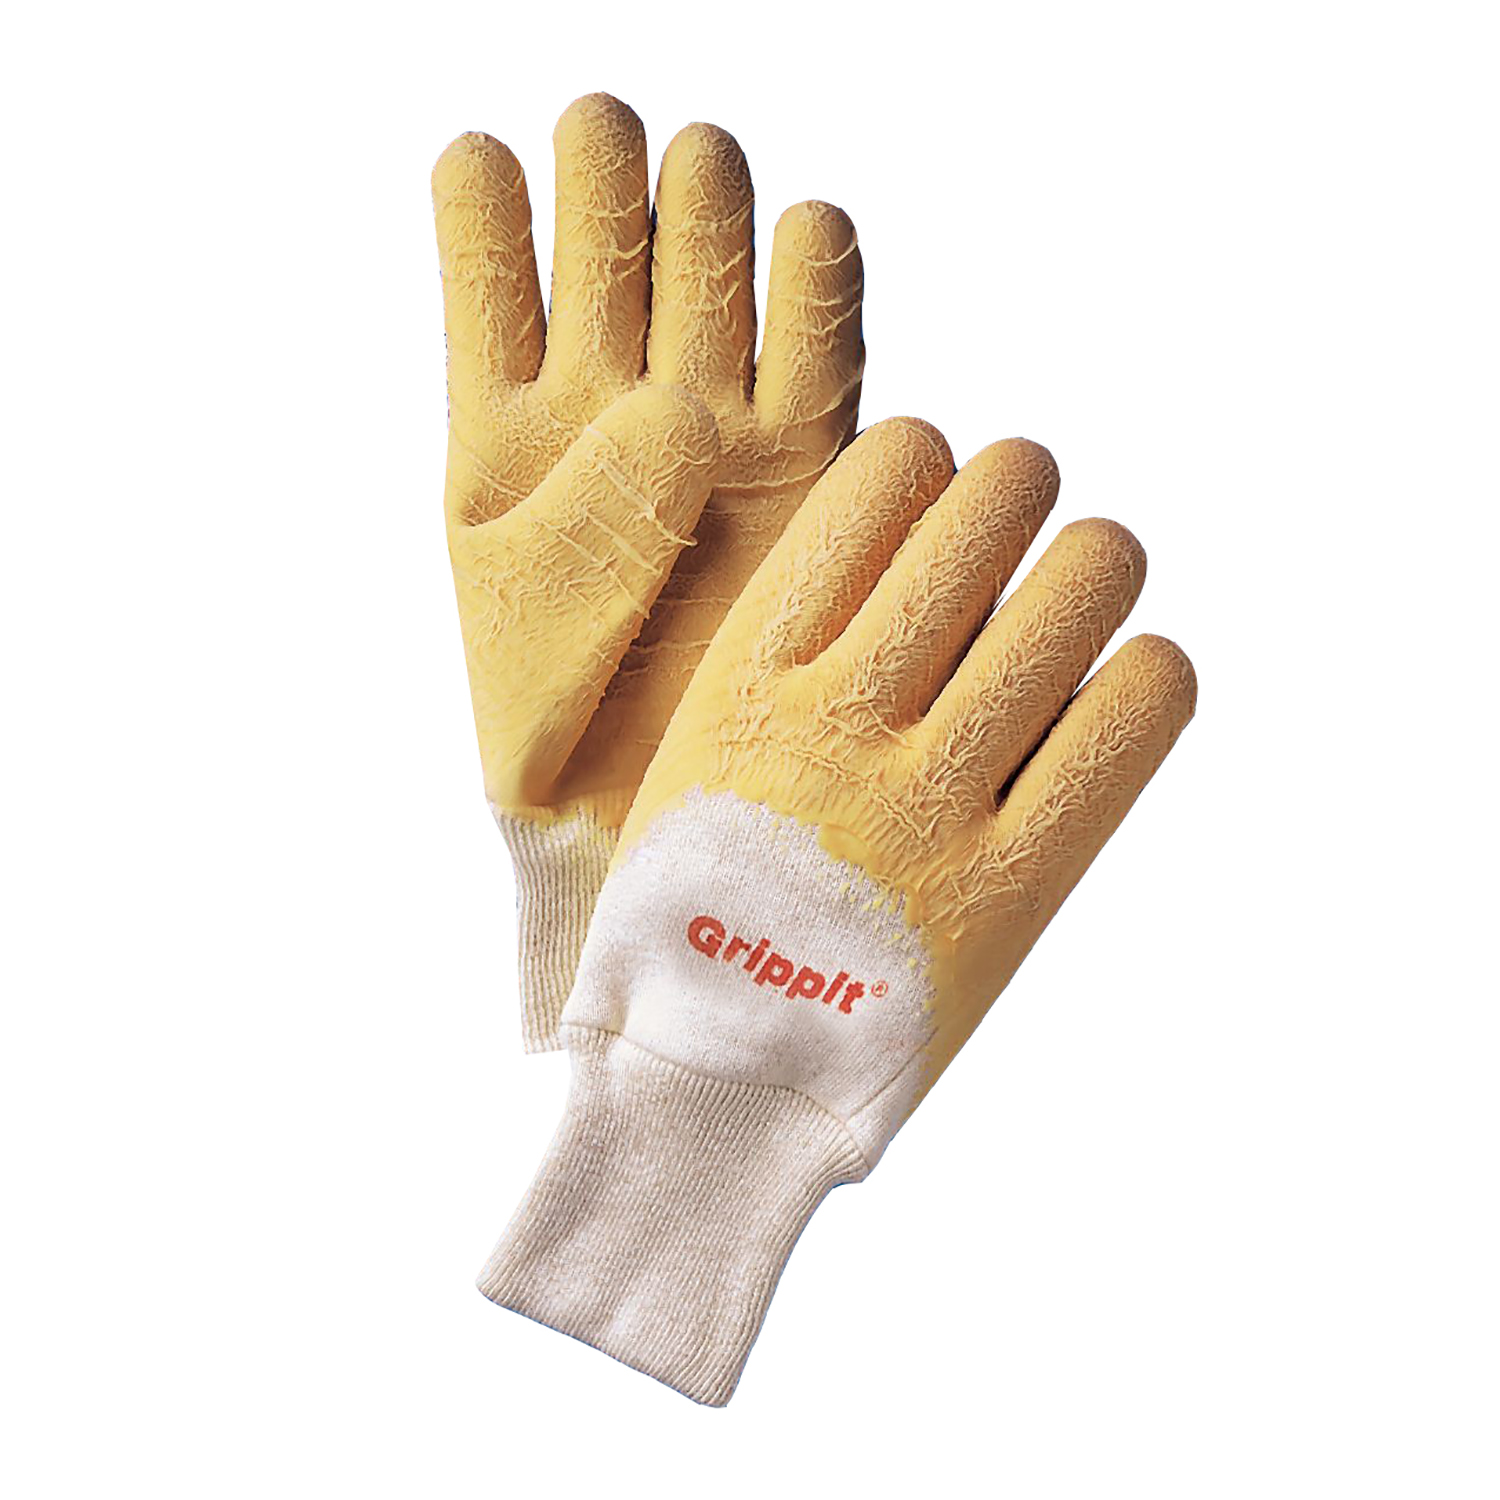 Grippit Rubber Coated Gloves with Crinkle Finish, Knit Wrist, 1 Pair